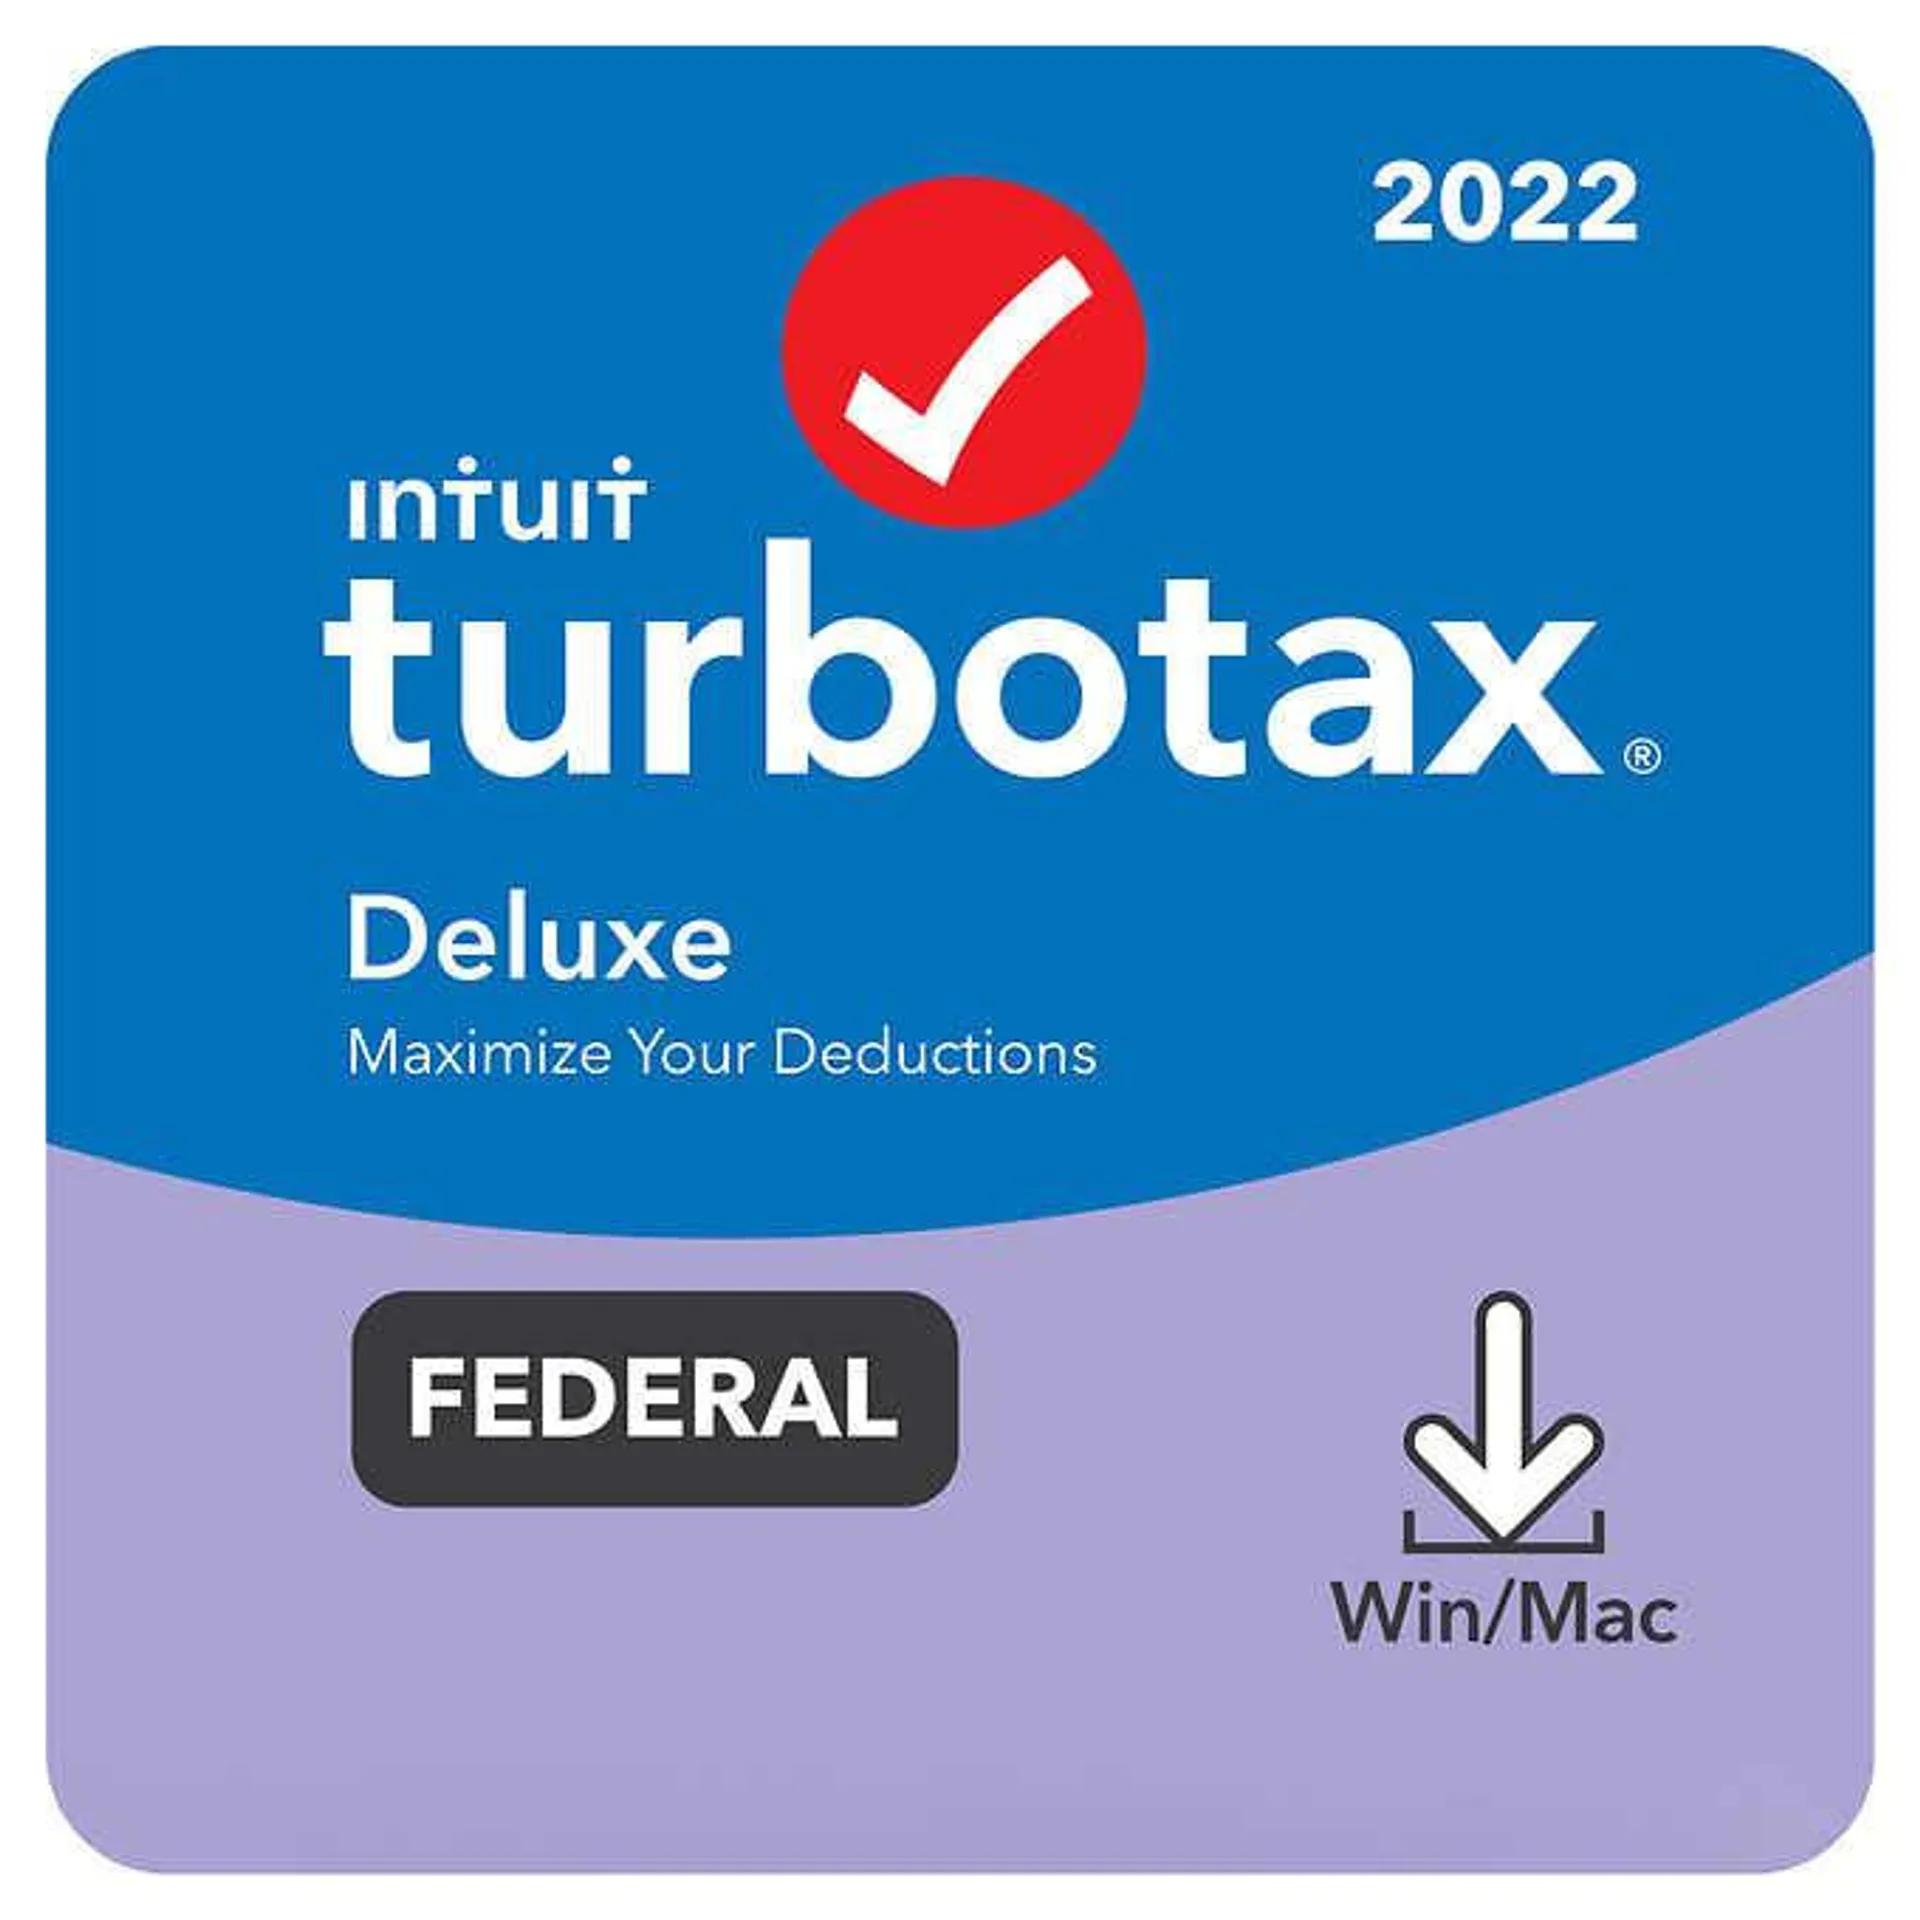 TurboTax Deluxe 2022 Federal Only E-File, for PC/Mac, Includes $10 Credit In-Product*